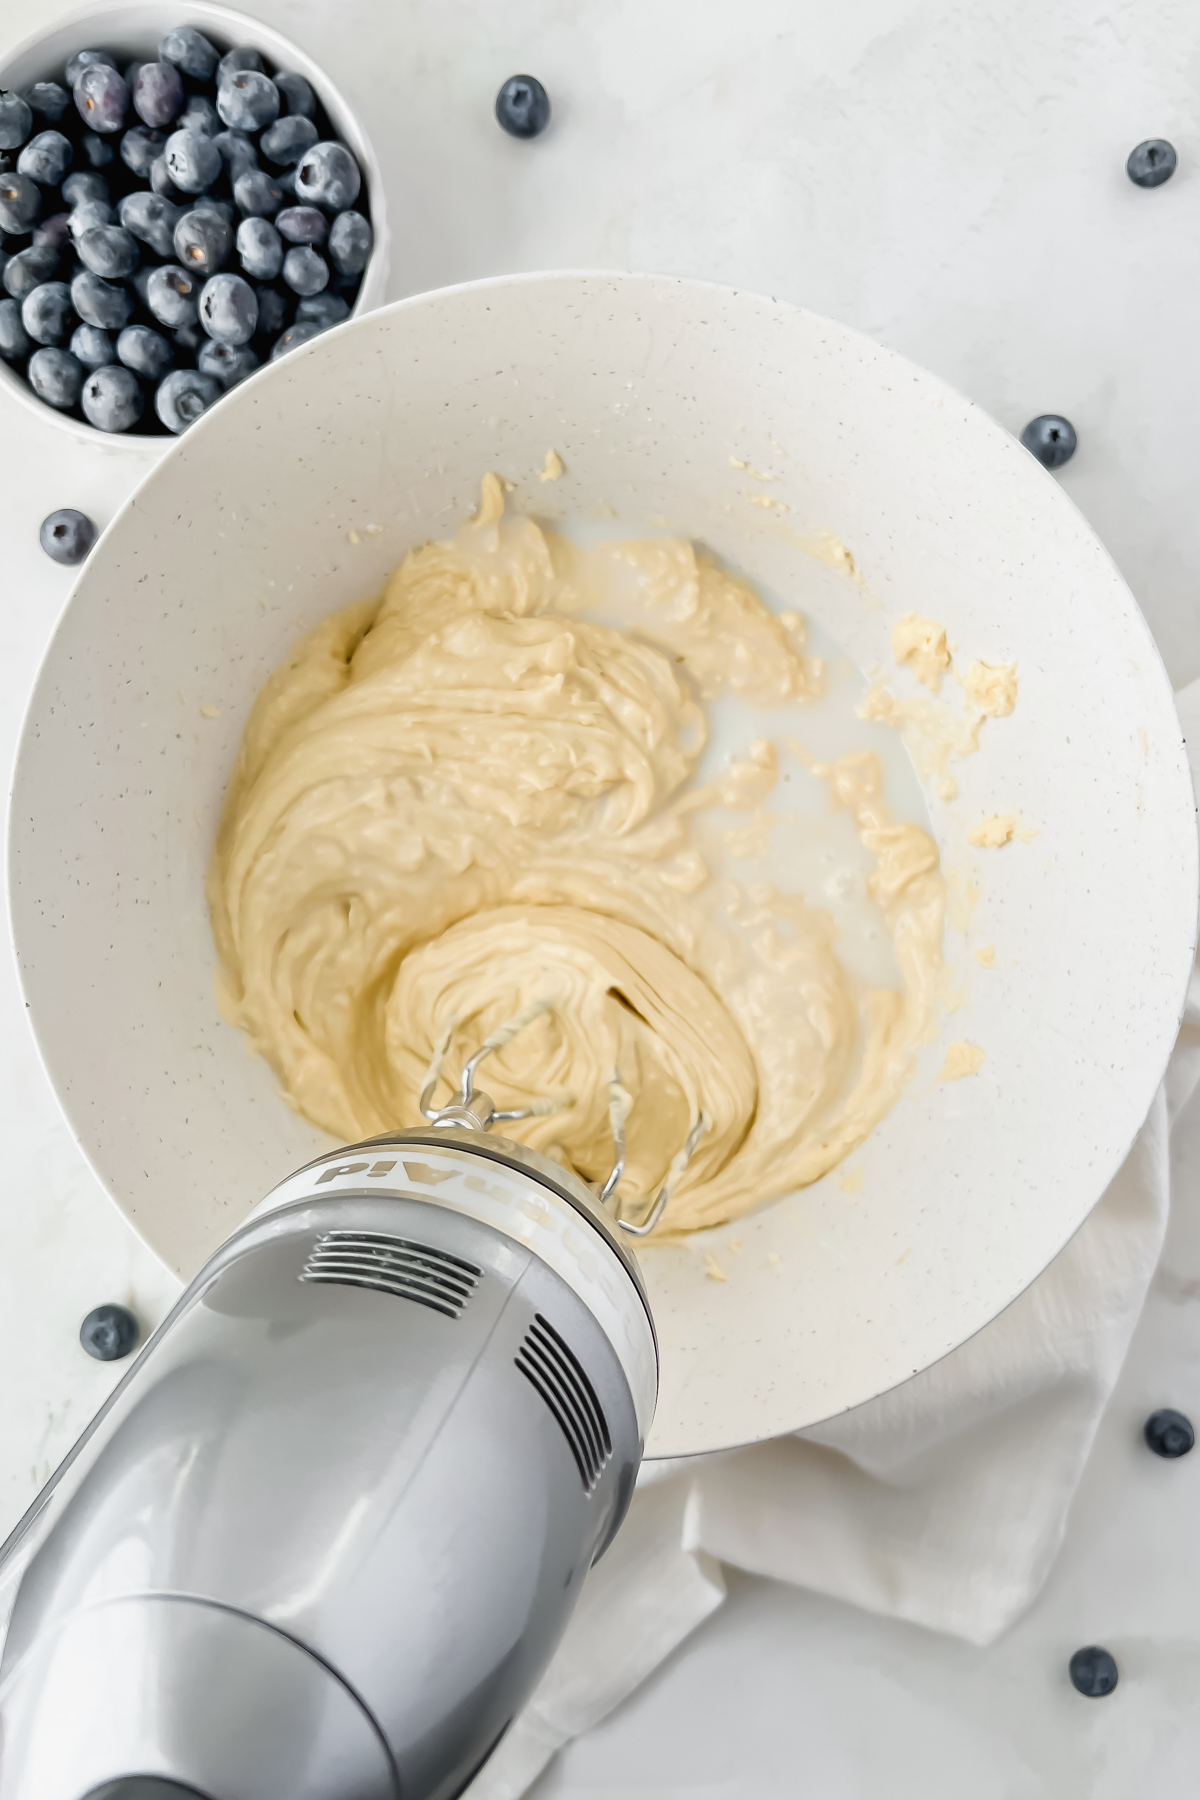 electric hand mixer mixing blueberry protein muffin batter in white mixing bowl.